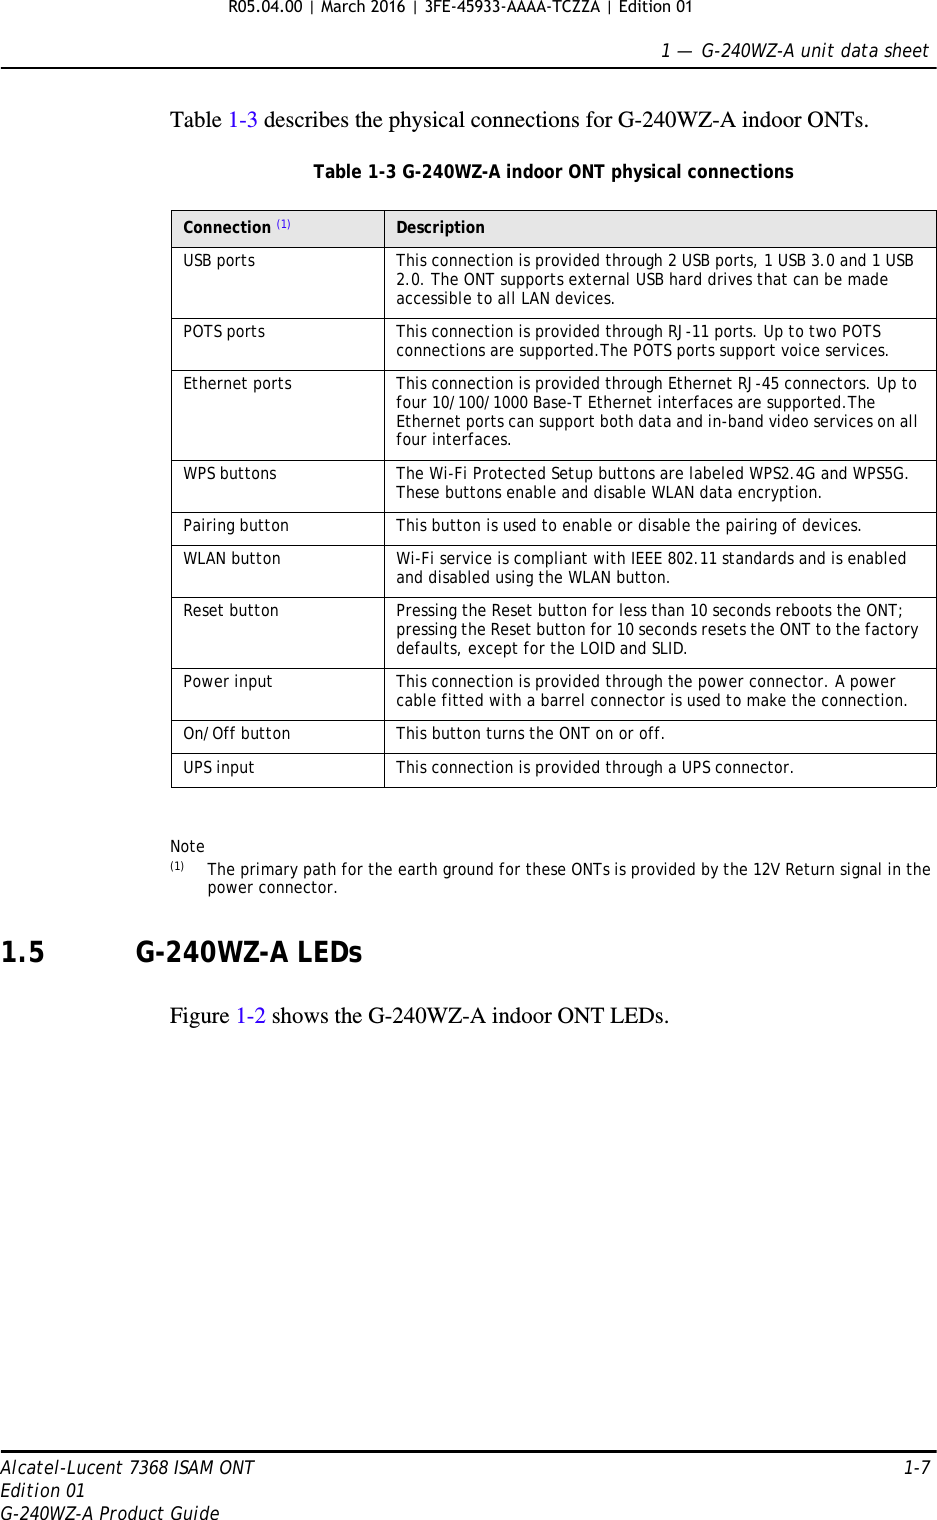 1 —  G-240WZ-A unit data sheetAlcatel-Lucent 7368 ISAM ONT 1-7Edition 01G-240WZ-A Product GuideTable 1-3 describes the physical connections for G-240WZ-A indoor ONTs.Table 1-3 G-240WZ-A indoor ONT physical connectionsNote(1) The primary path for the earth ground for these ONTs is provided by the 12V Return signal in the power connector.1.5 G-240WZ-A LEDsFigure 1-2 shows the G-240WZ-A indoor ONT LEDs.Connection (1) DescriptionUSB ports This connection is provided through 2 USB ports, 1 USB 3.0 and 1 USB 2.0. The ONT supports external USB hard drives that can be made accessible to all LAN devices.POTS ports This connection is provided through RJ-11 ports. Up to two POTS connections are supported.The POTS ports support voice services. Ethernet ports This connection is provided through Ethernet RJ-45 connectors. Up to four 10/100/1000 Base-T Ethernet interfaces are supported.The Ethernet ports can support both data and in-band video services on all four interfaces.WPS buttons The Wi-Fi Protected Setup buttons are labeled WPS2.4G and WPS5G. These buttons enable and disable WLAN data encryption.Pairing button This button is used to enable or disable the pairing of devices.WLAN button Wi-Fi service is compliant with IEEE 802.11 standards and is enabled and disabled using the WLAN button. Reset button Pressing the Reset button for less than 10 seconds reboots the ONT; pressing the Reset button for 10 seconds resets the ONT to the factory defaults, except for the LOID and SLID.Power input This connection is provided through the power connector. A power cable fitted with a barrel connector is used to make the connection. On/Off button This button turns the ONT on or off. UPS input This connection is provided through a UPS connector. R05.04.00 | March 2016 | 3FE-45933-AAAA-TCZZA | Edition 01 